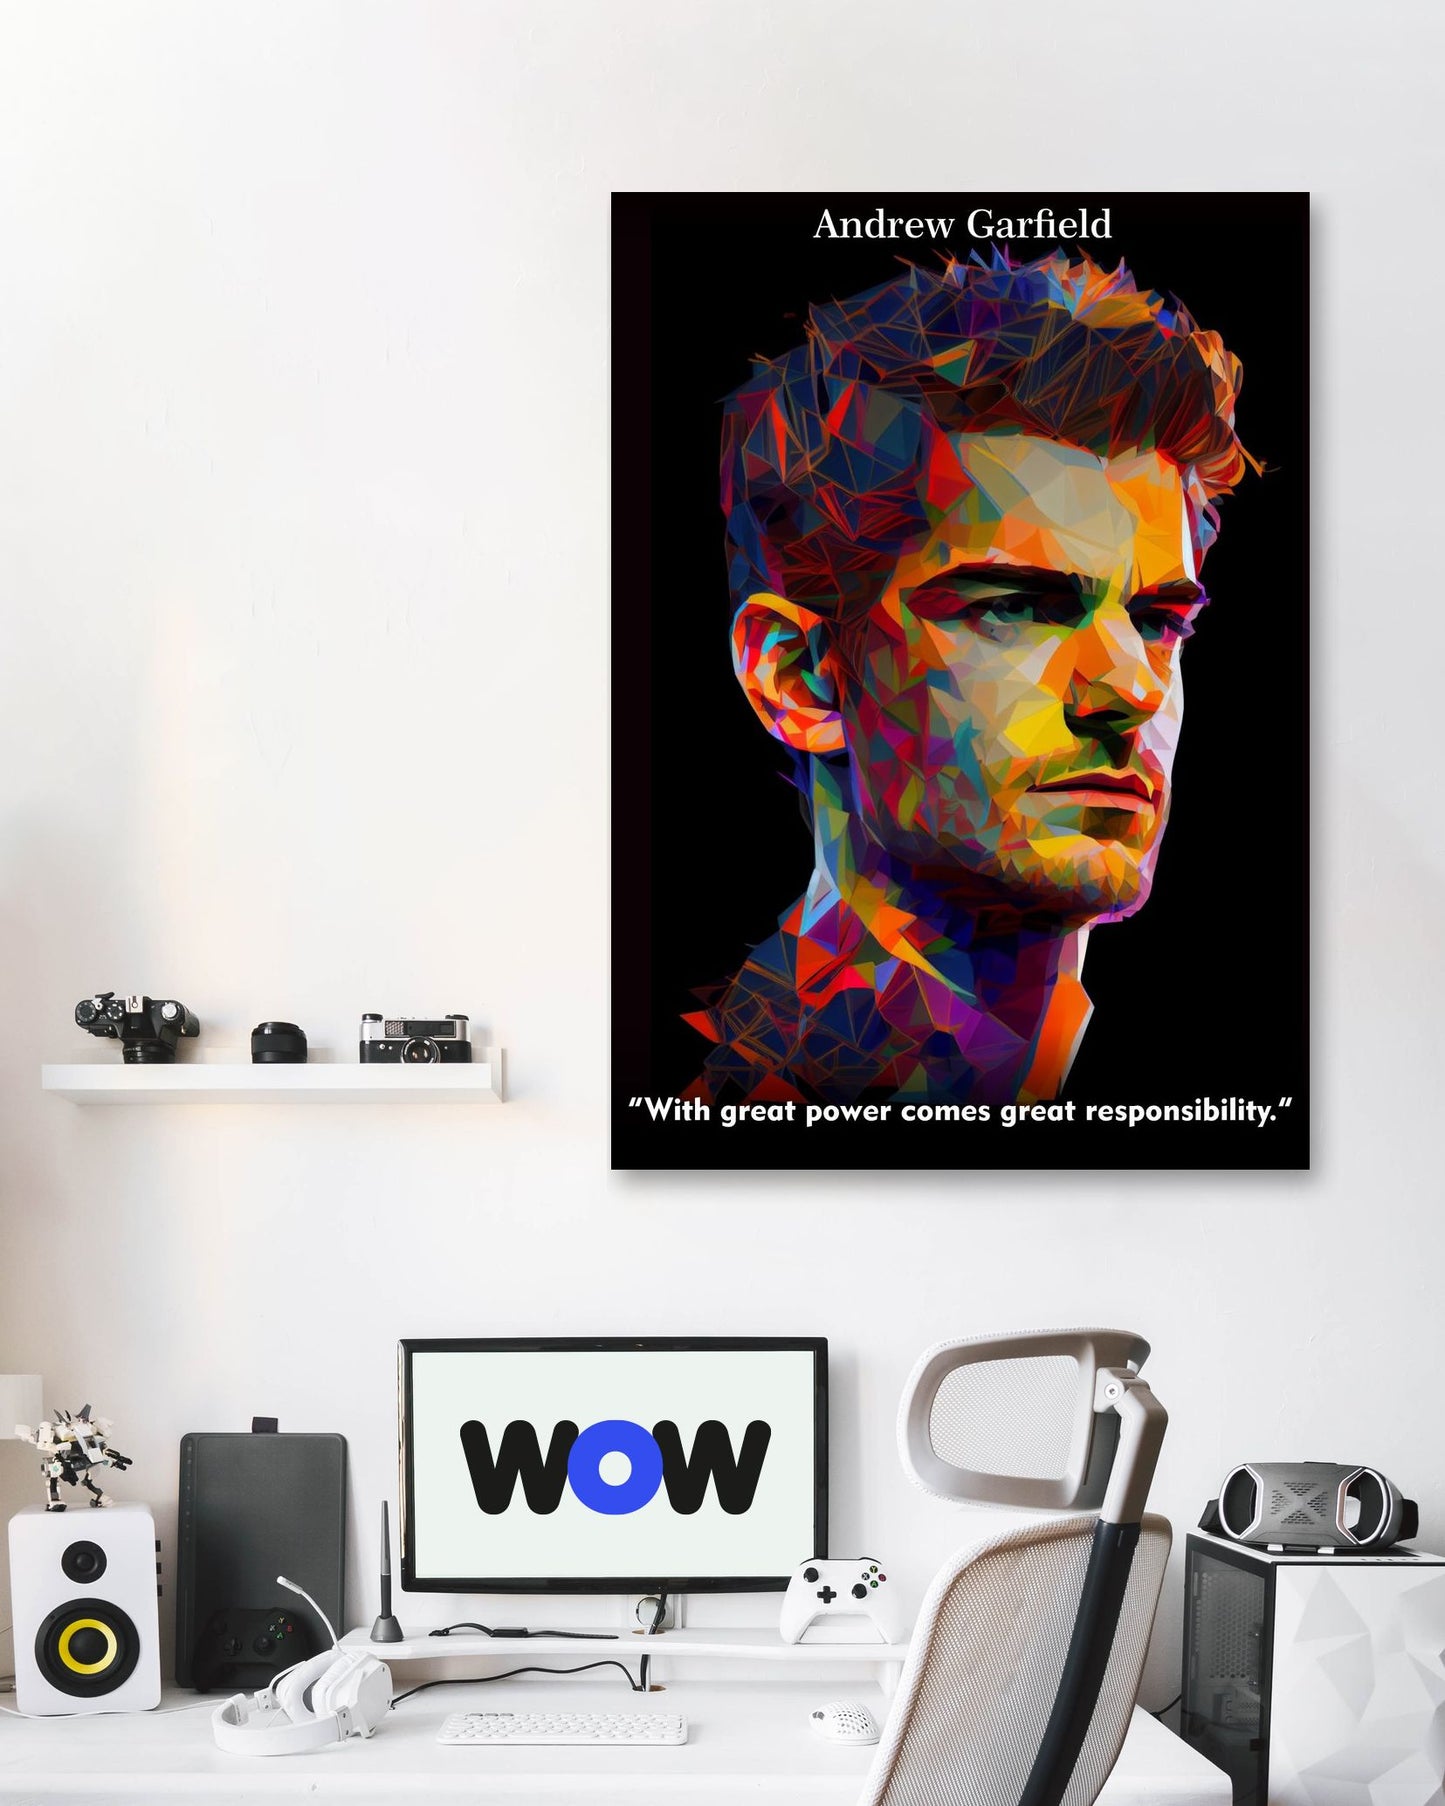 Andrew Garfield Low Poly - @WpapArtist